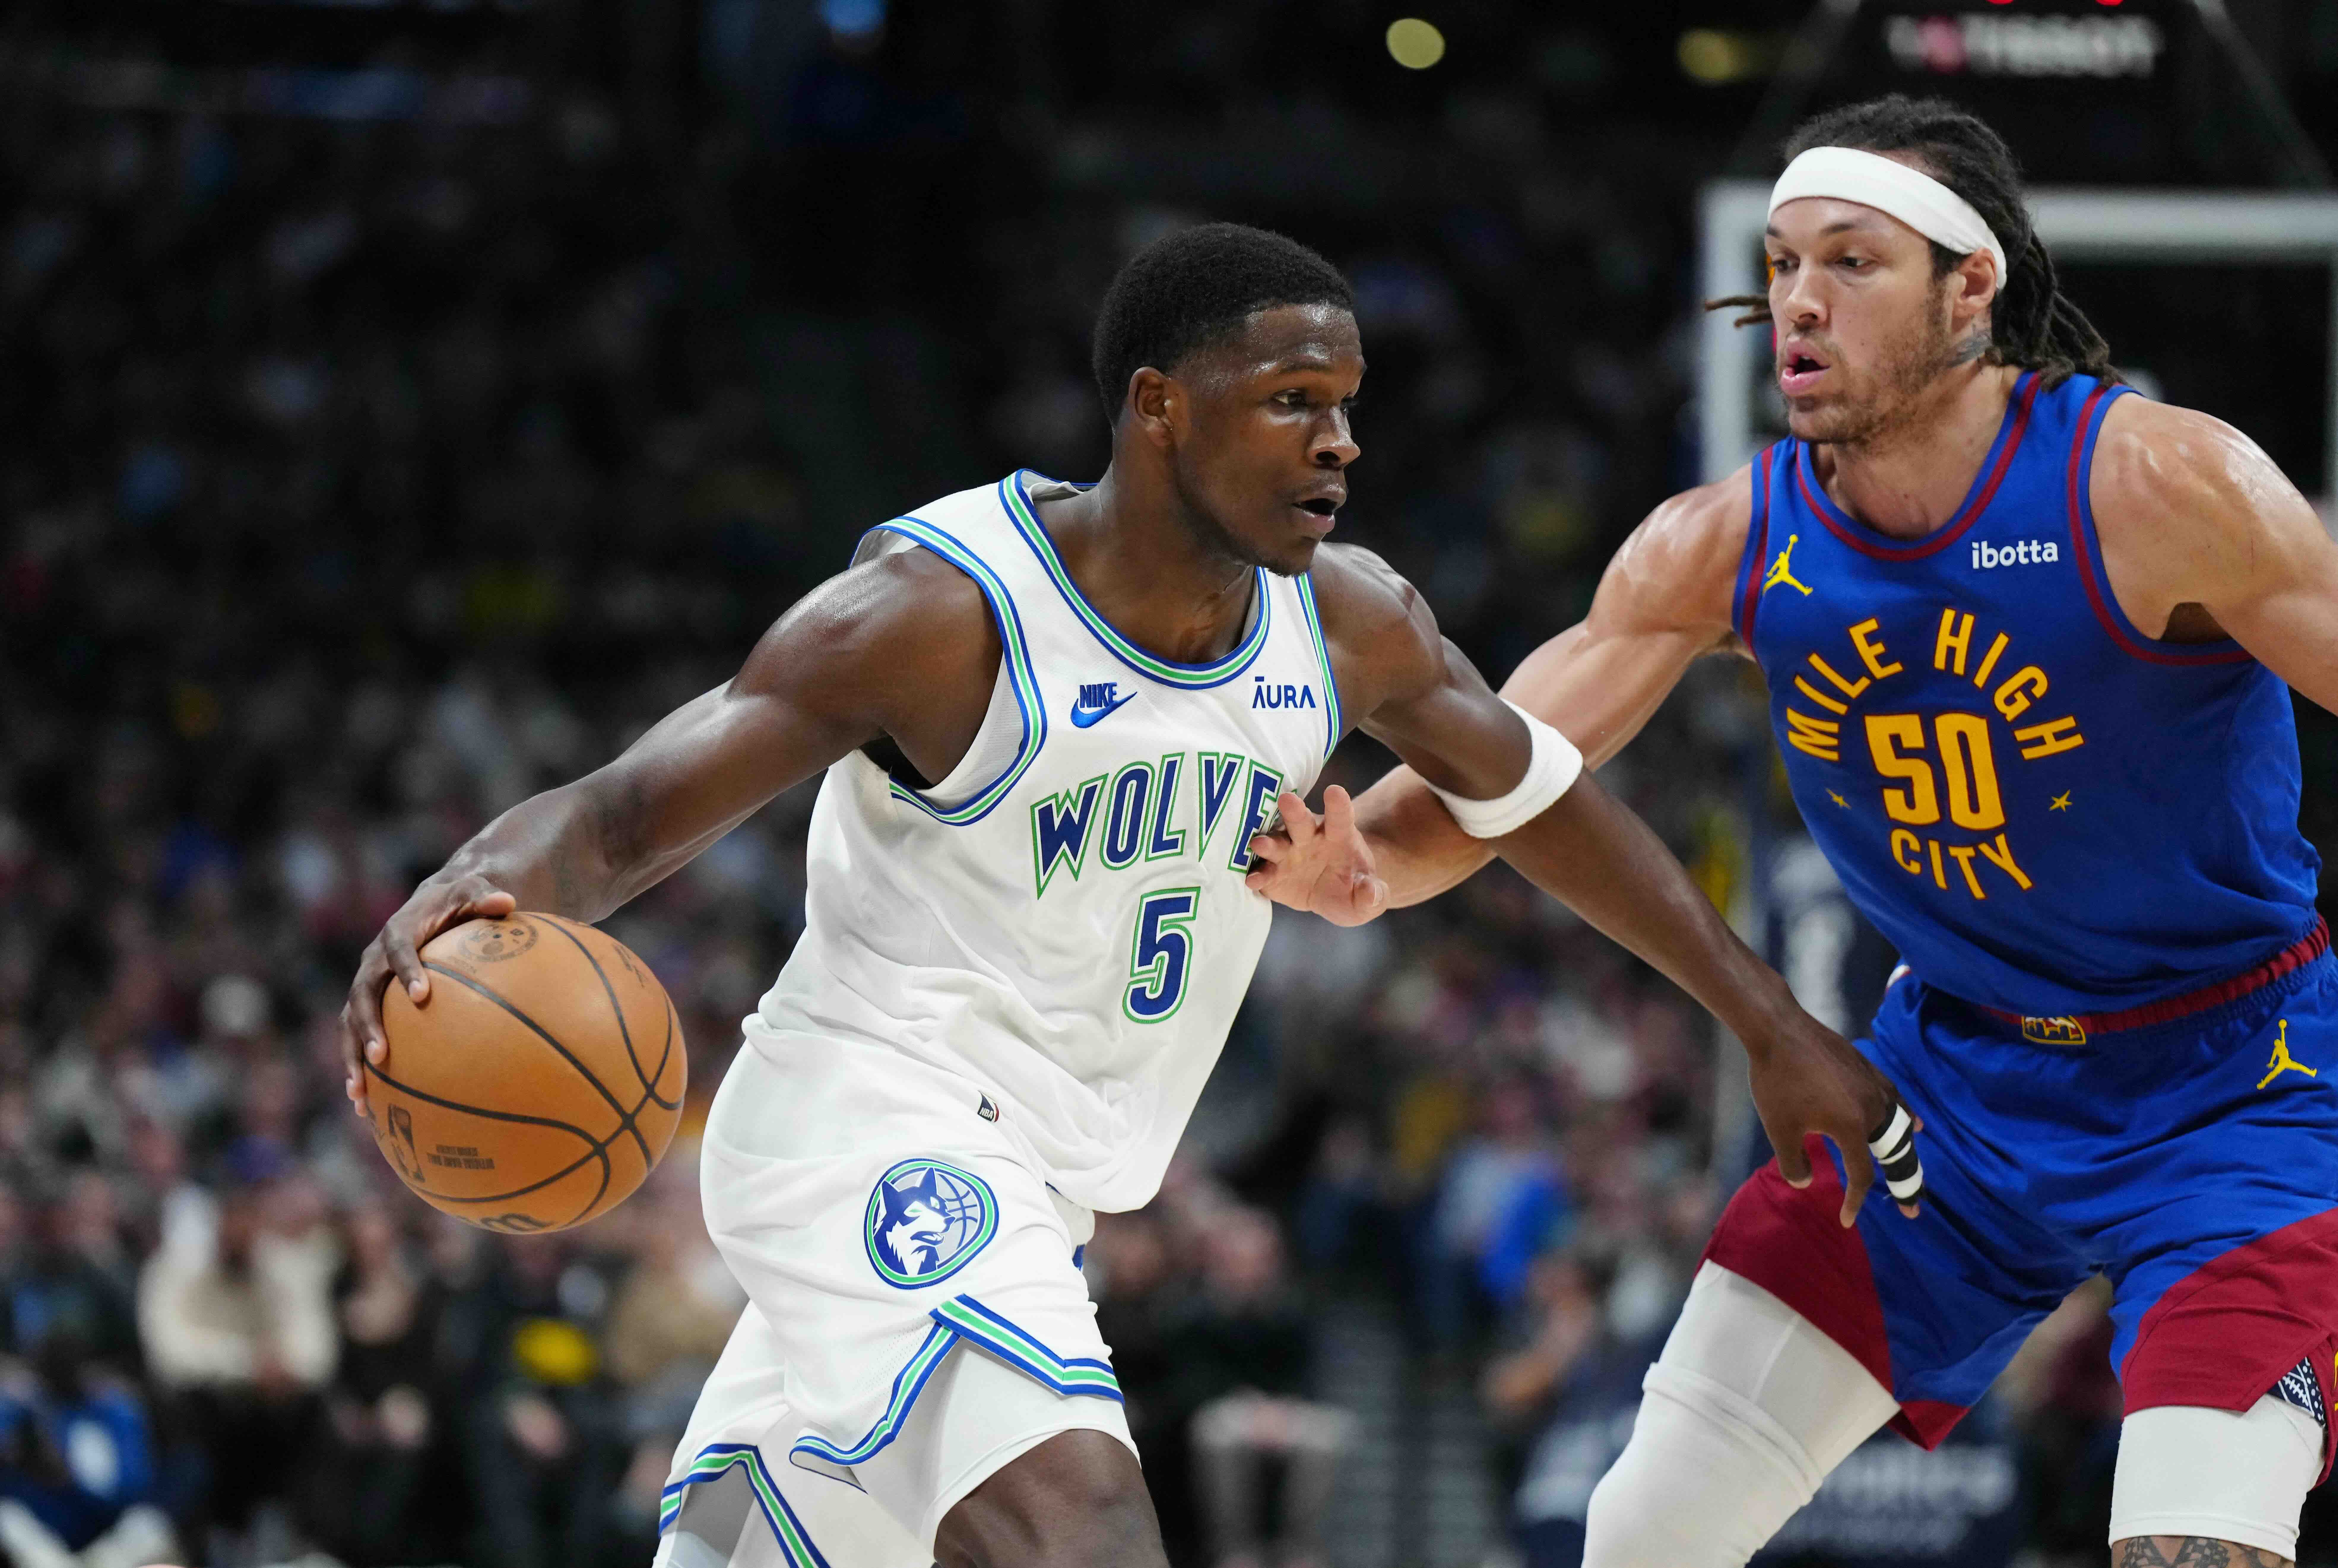 NBA: Wolves top Nuggets to pull into tie for first in West